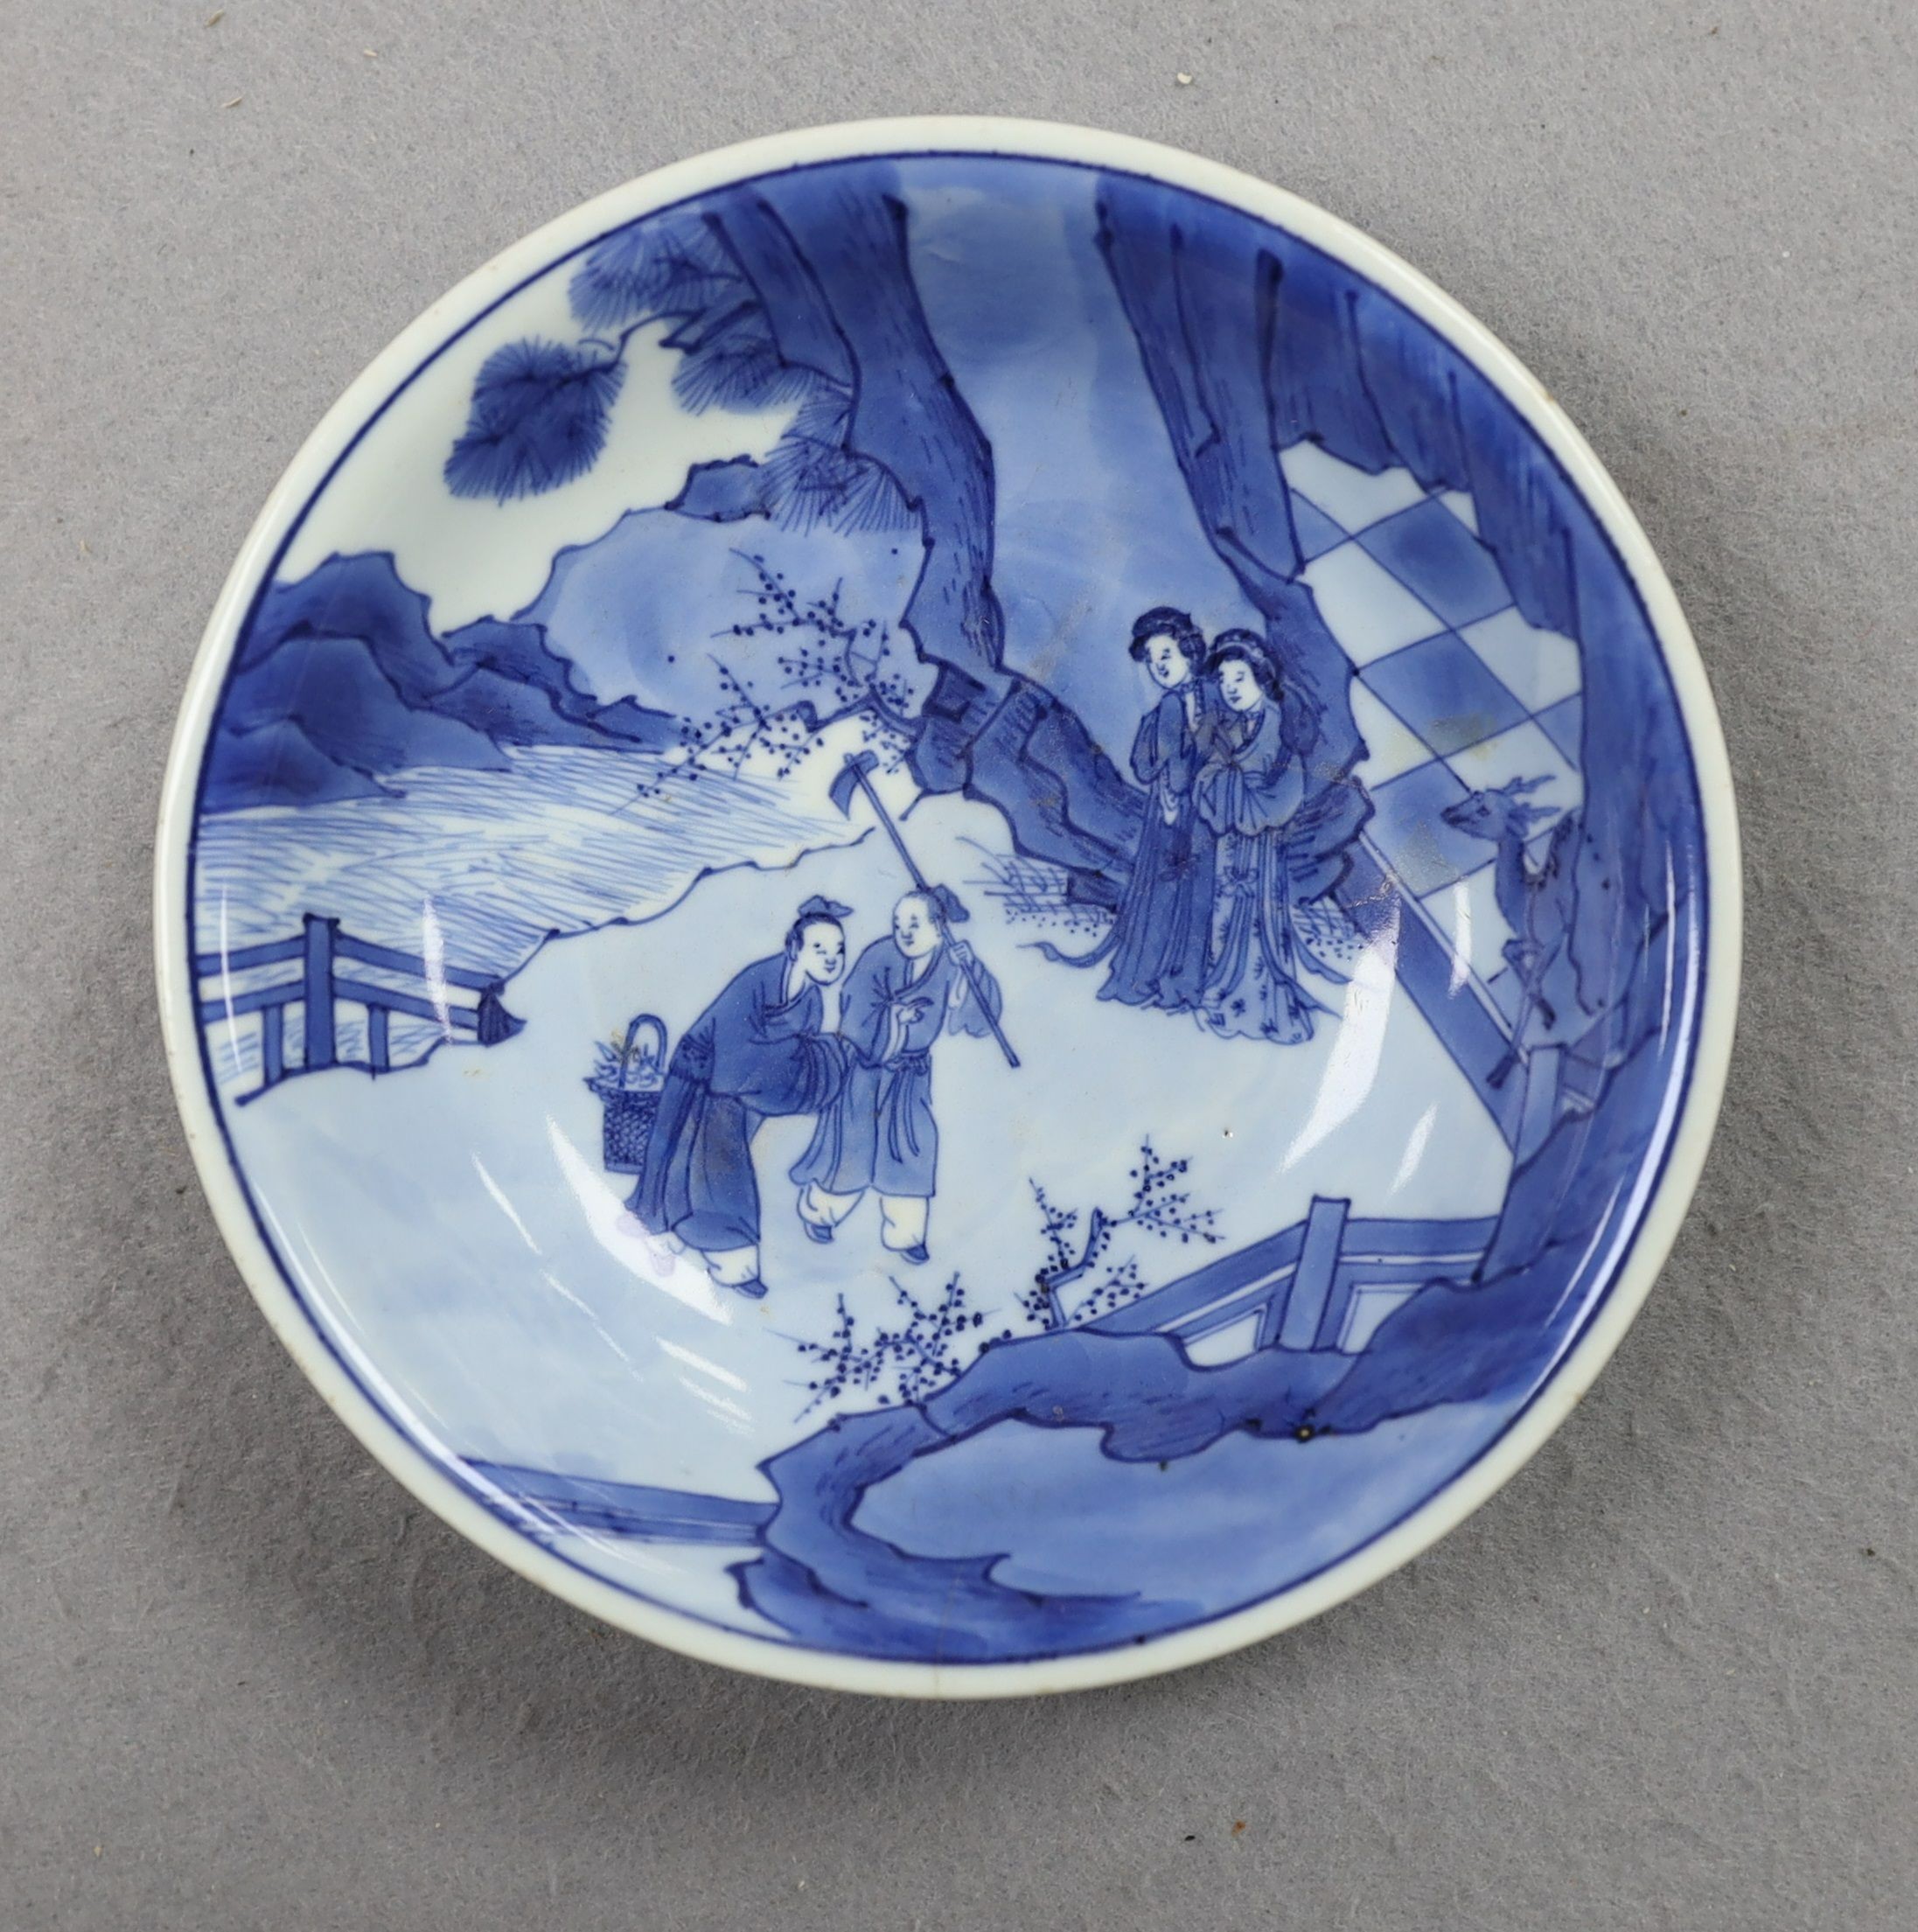 NB BOTH WITH HAIRLINE CRACKS A pair of Chinese blue and white small dishes, Kangxi six character marks and of the period (1662-1722), 15.7cm and 15.8cm diameter, foot later pierced, hairline cracks